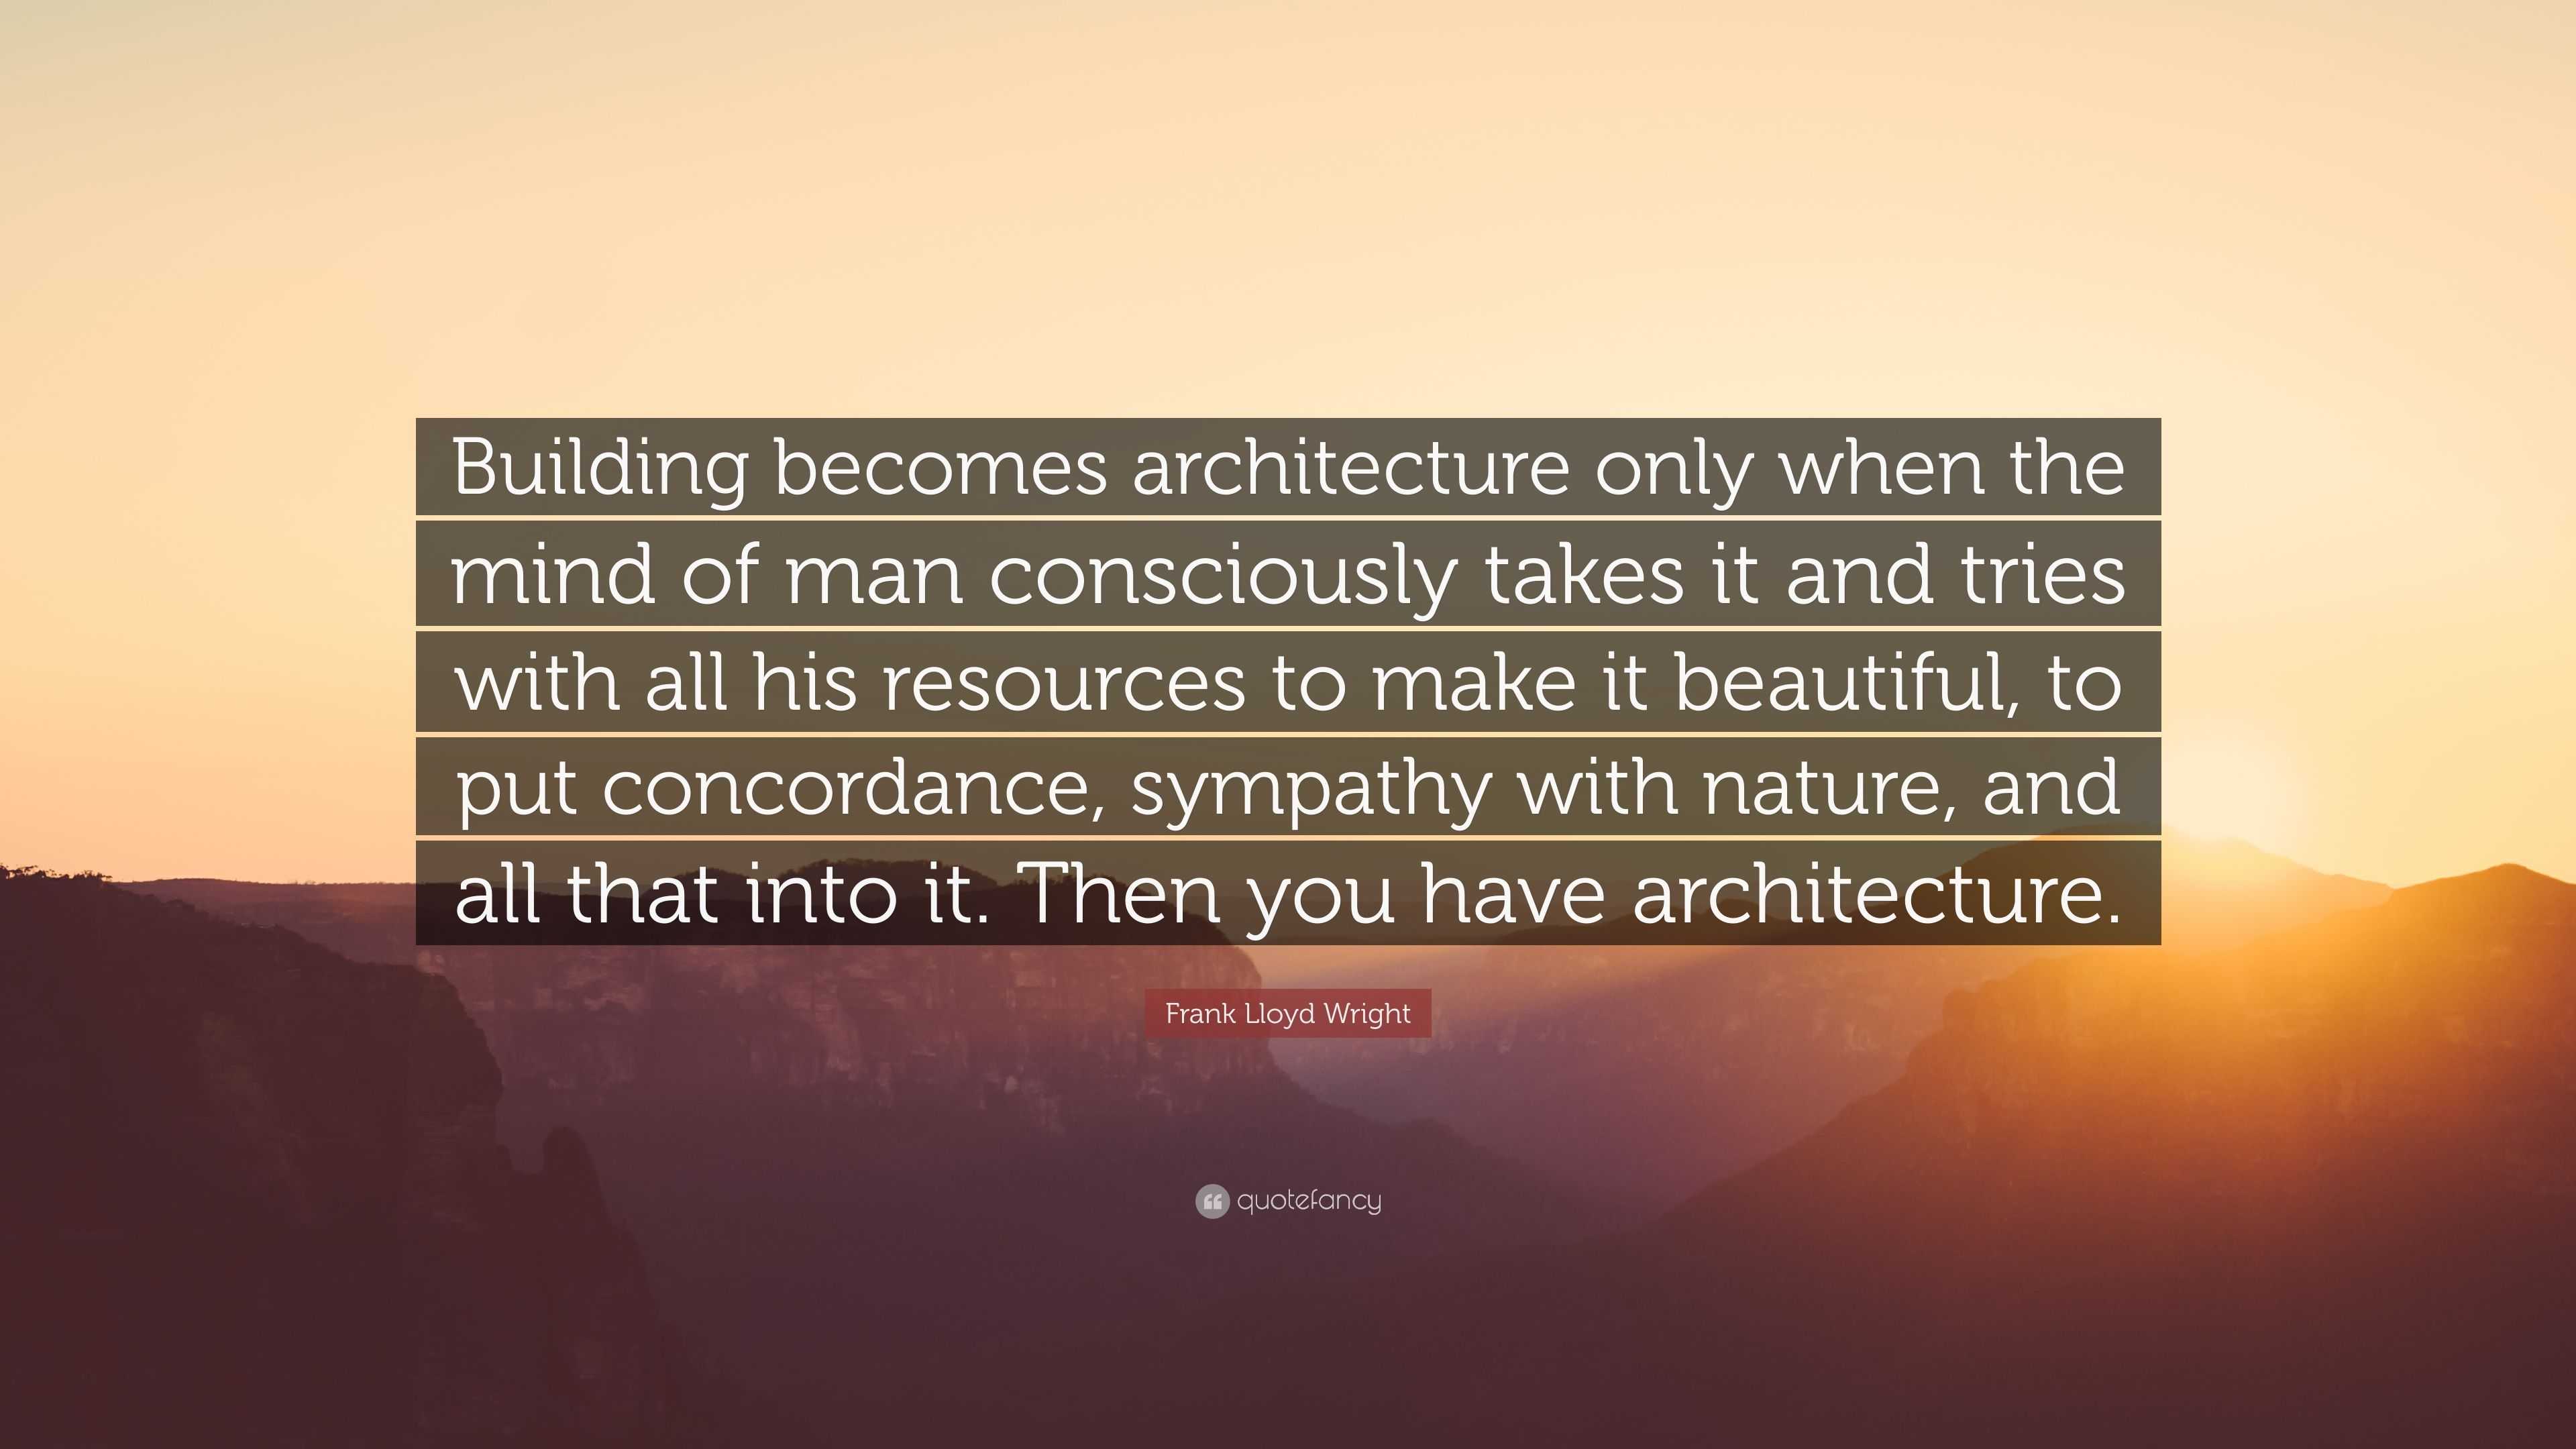 Frank Lloyd Wright Quote: “Building becomes architecture only when the ...